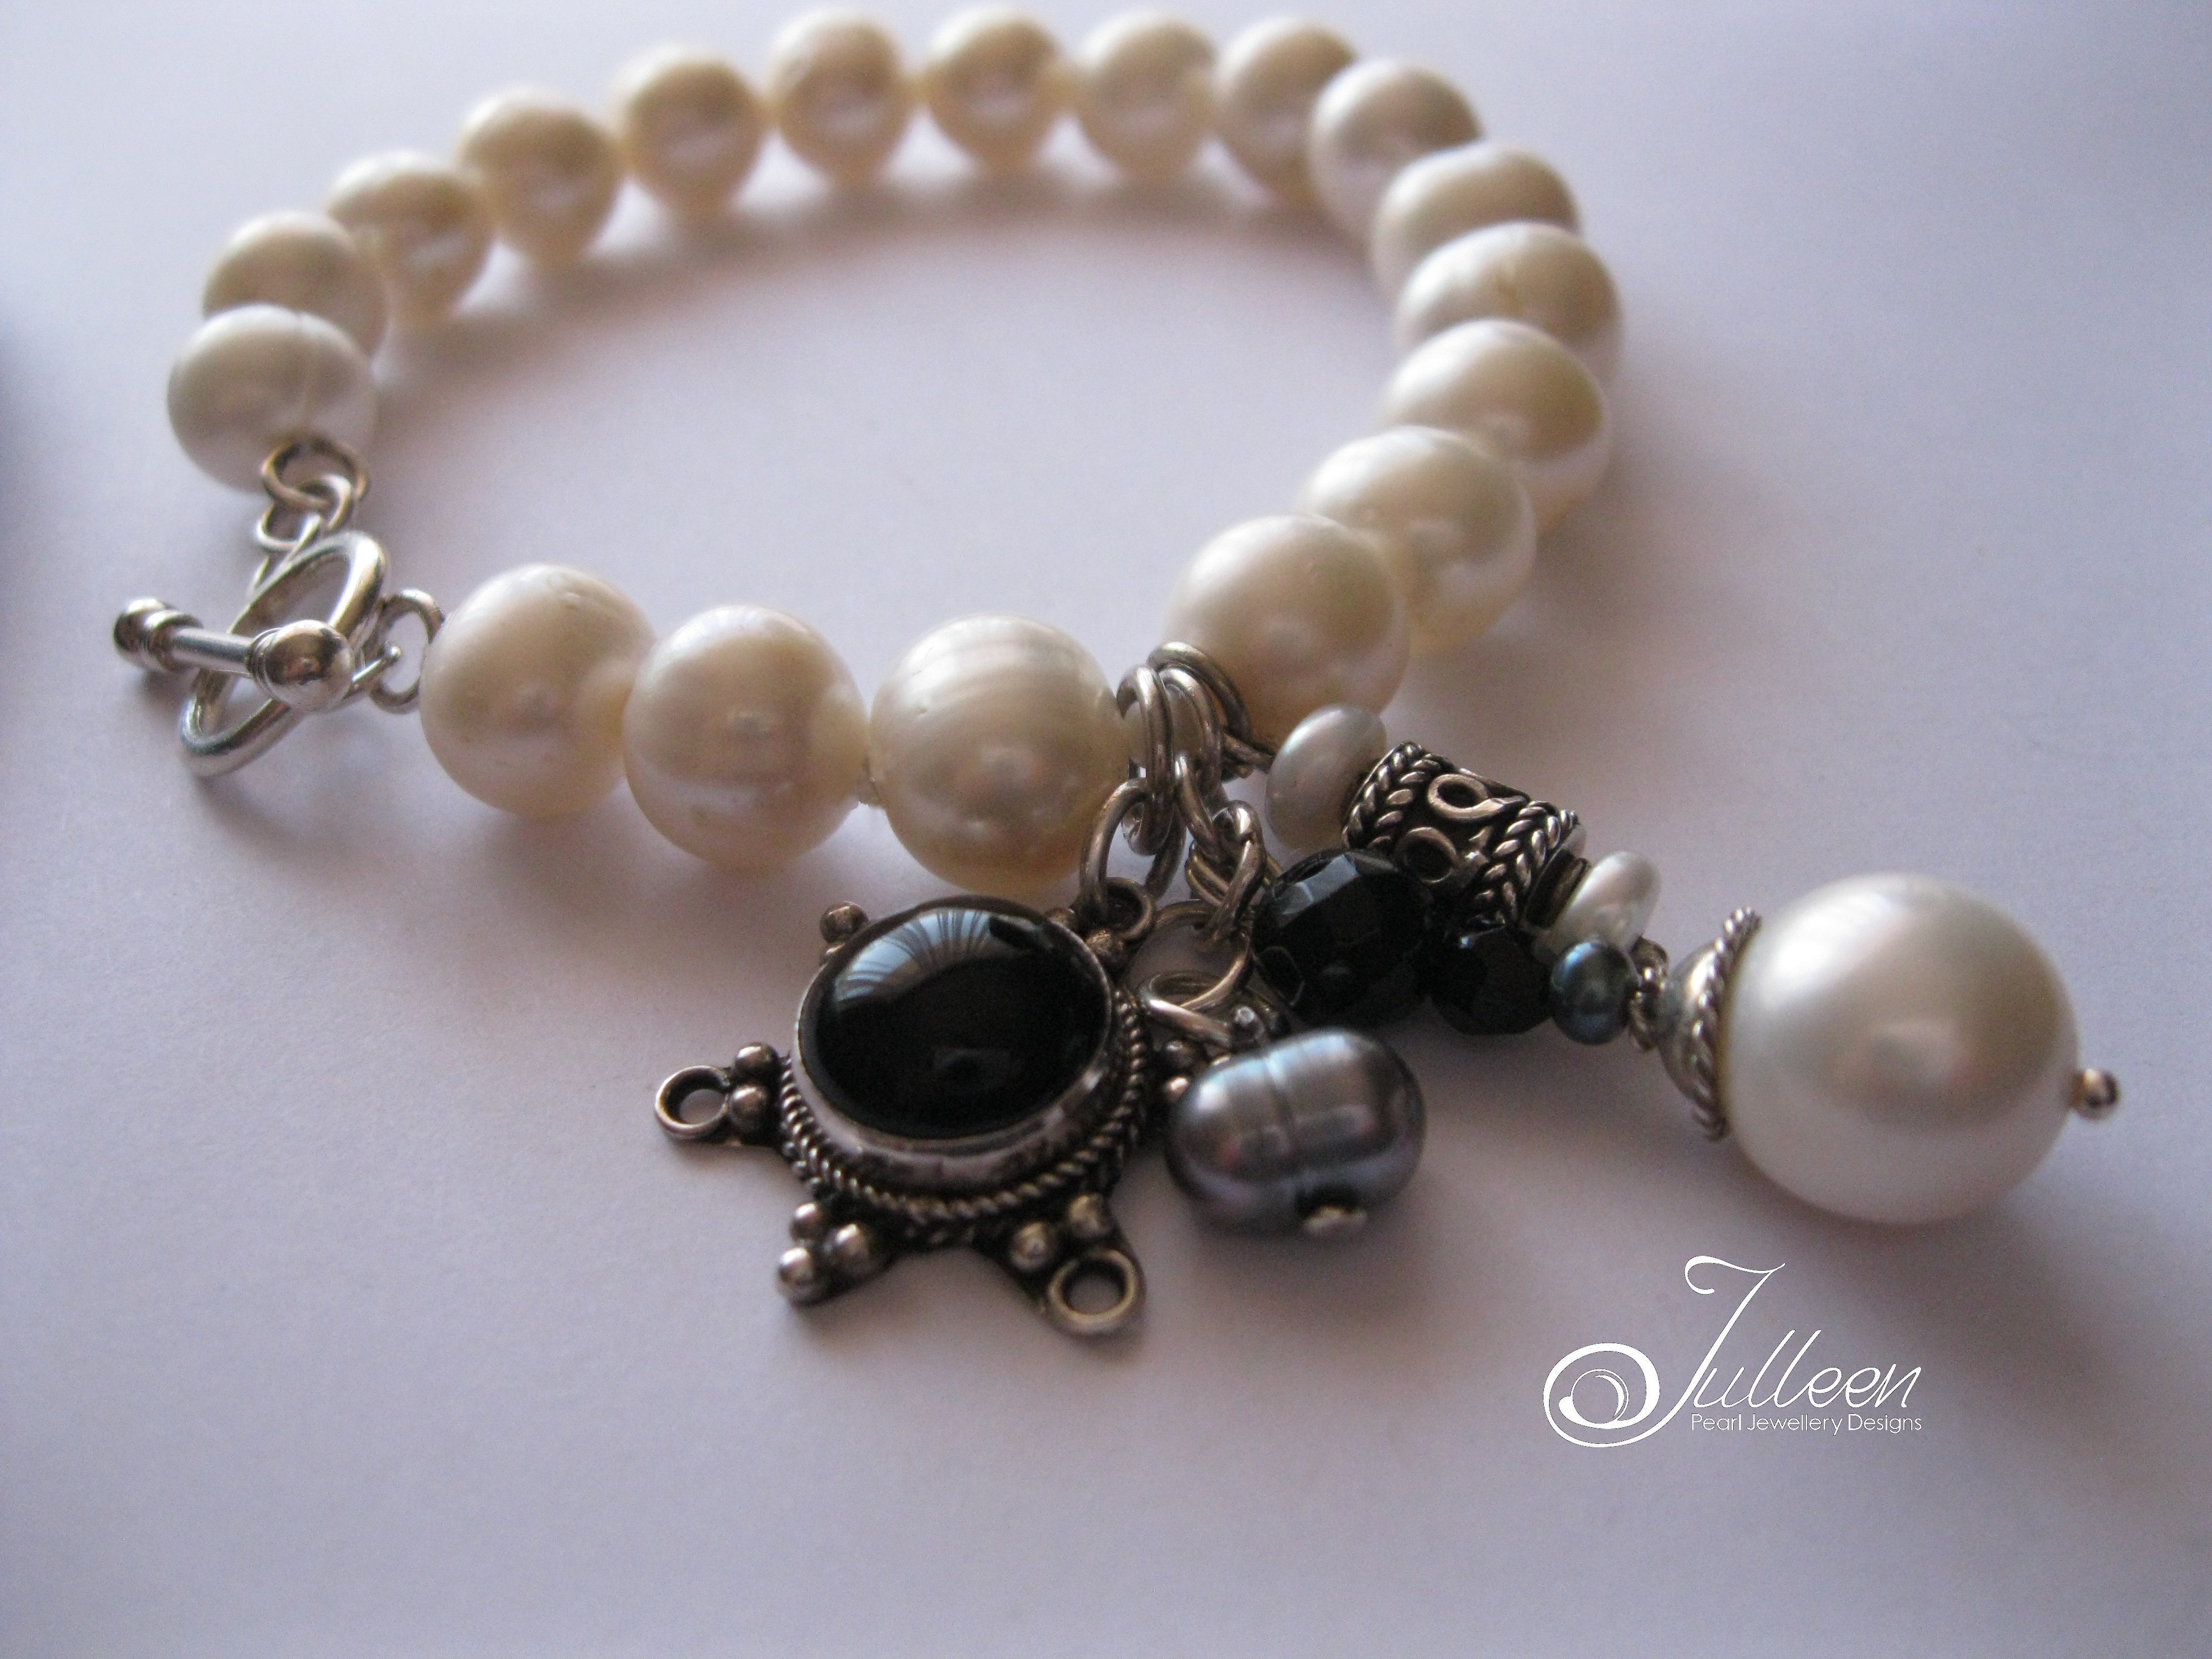 Onyx-and-Pearl-Charm-Bracelet-Julleen-4